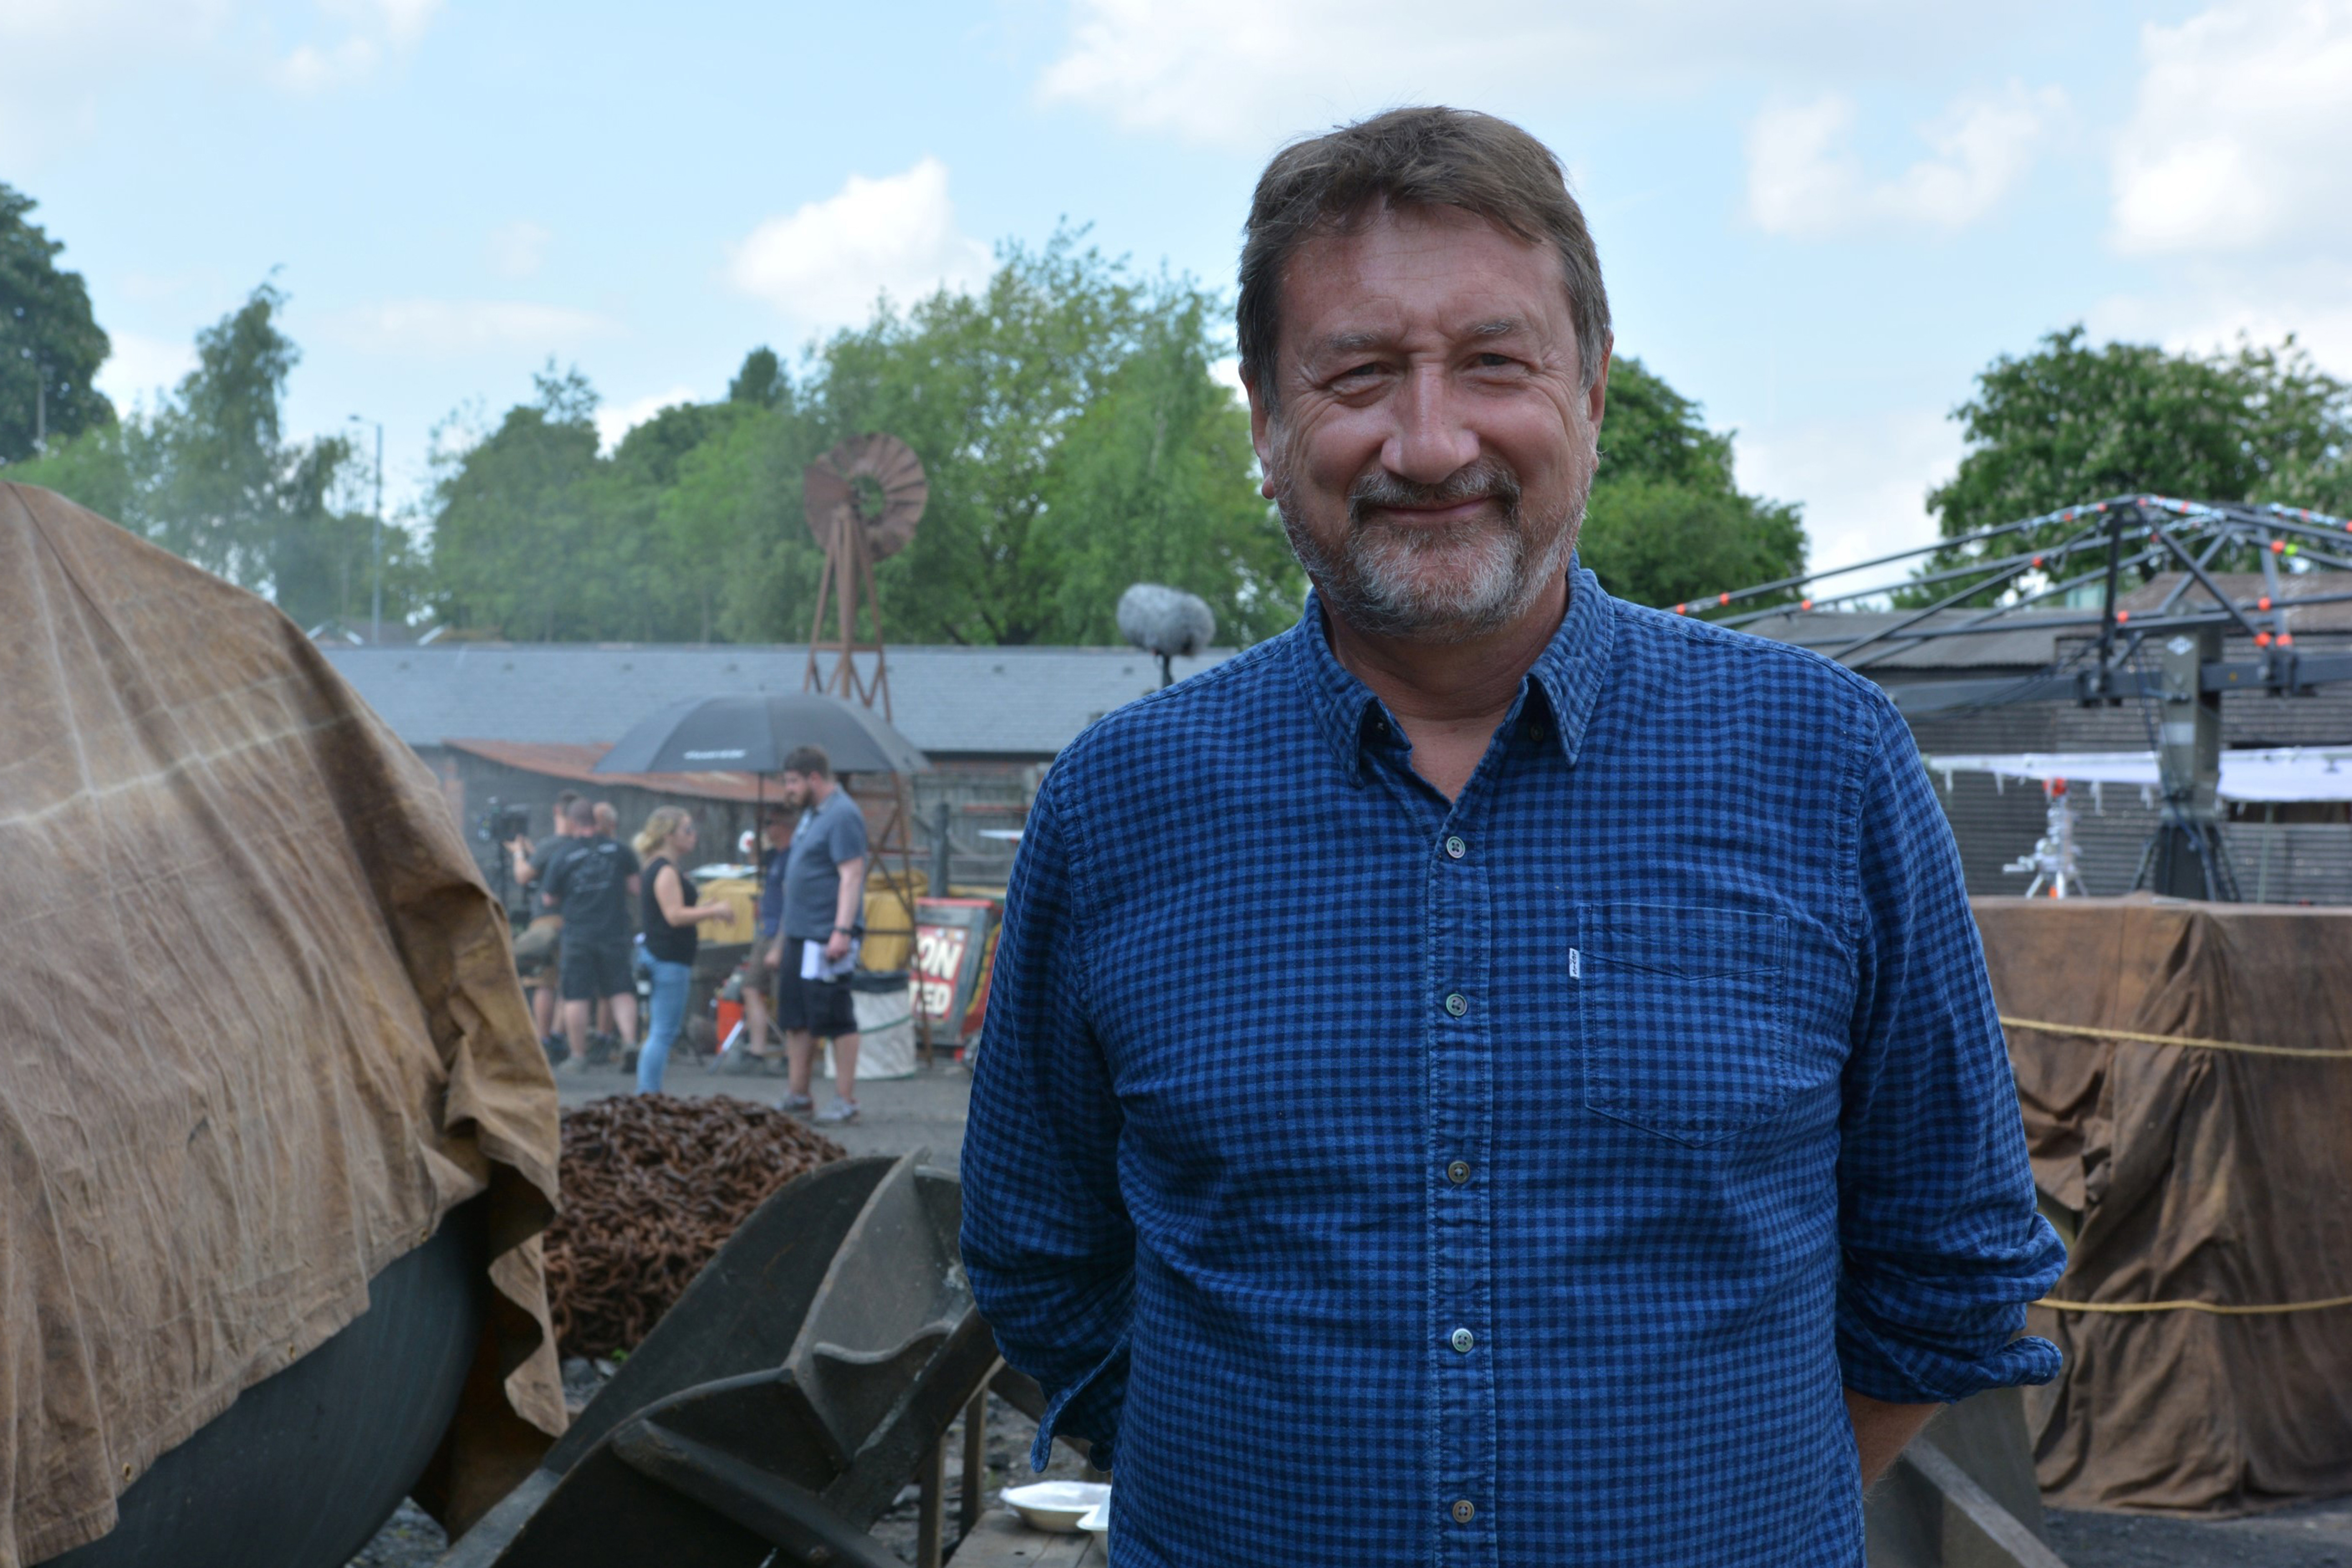 Peaky Blinders creator Steven Knight will be one of several well known faces on the new screen industry body to be launched next month